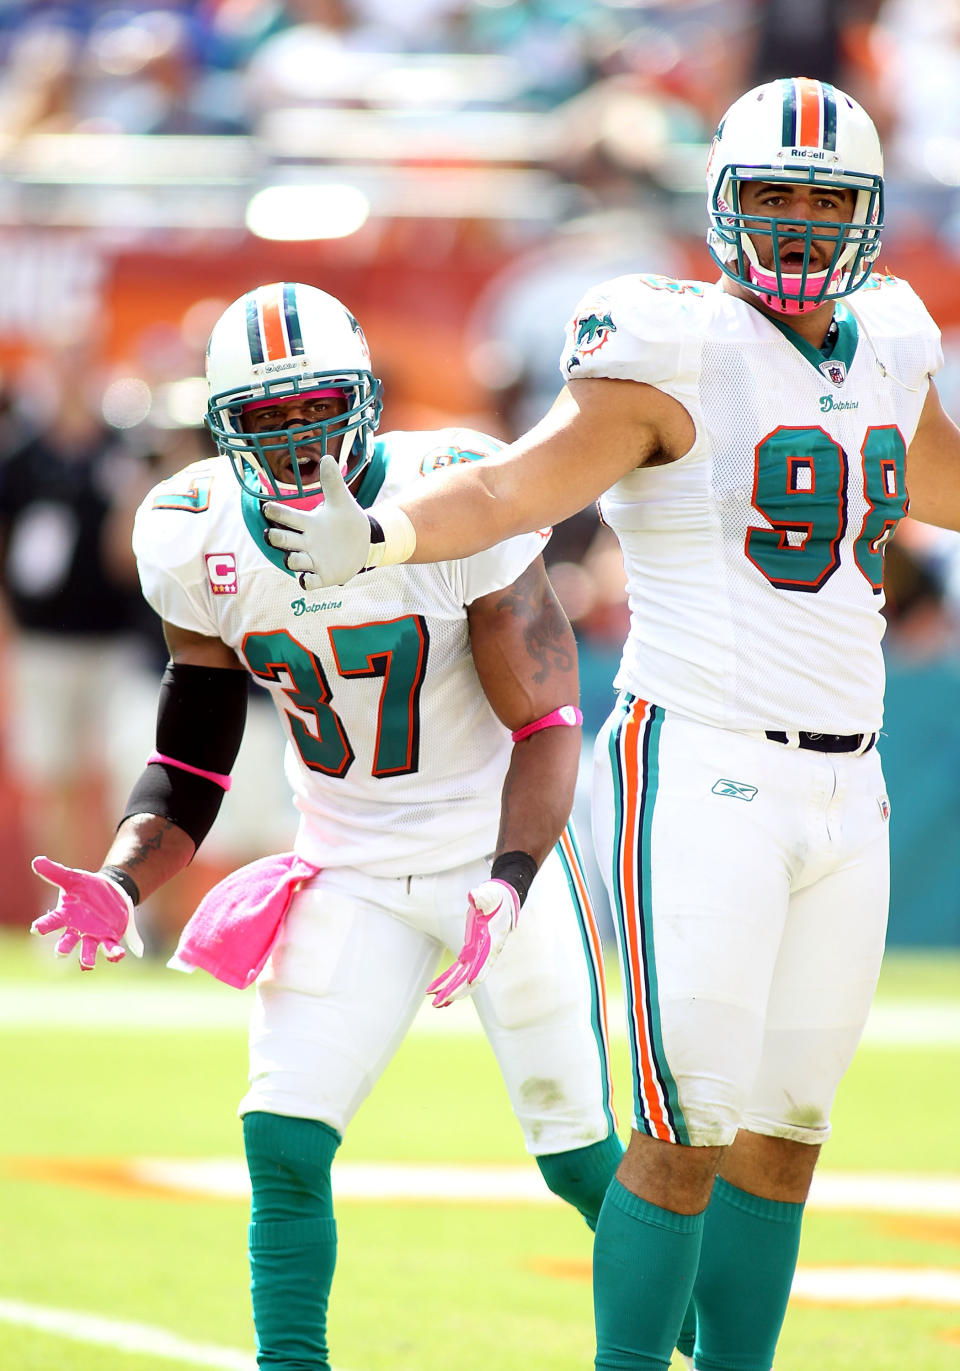 MIAMI GARDENS, FL - OCTOBER 23: Defensive back Yeremiah Bell #37 and Linebacker Jared Odrick #98 the Miami Dolphins complain over a call against the Denver Broncos at Sun Life Stadium on October 23, 2011 in Miami Gardens, Florida. (Photo by Marc Serota/Getty Images)